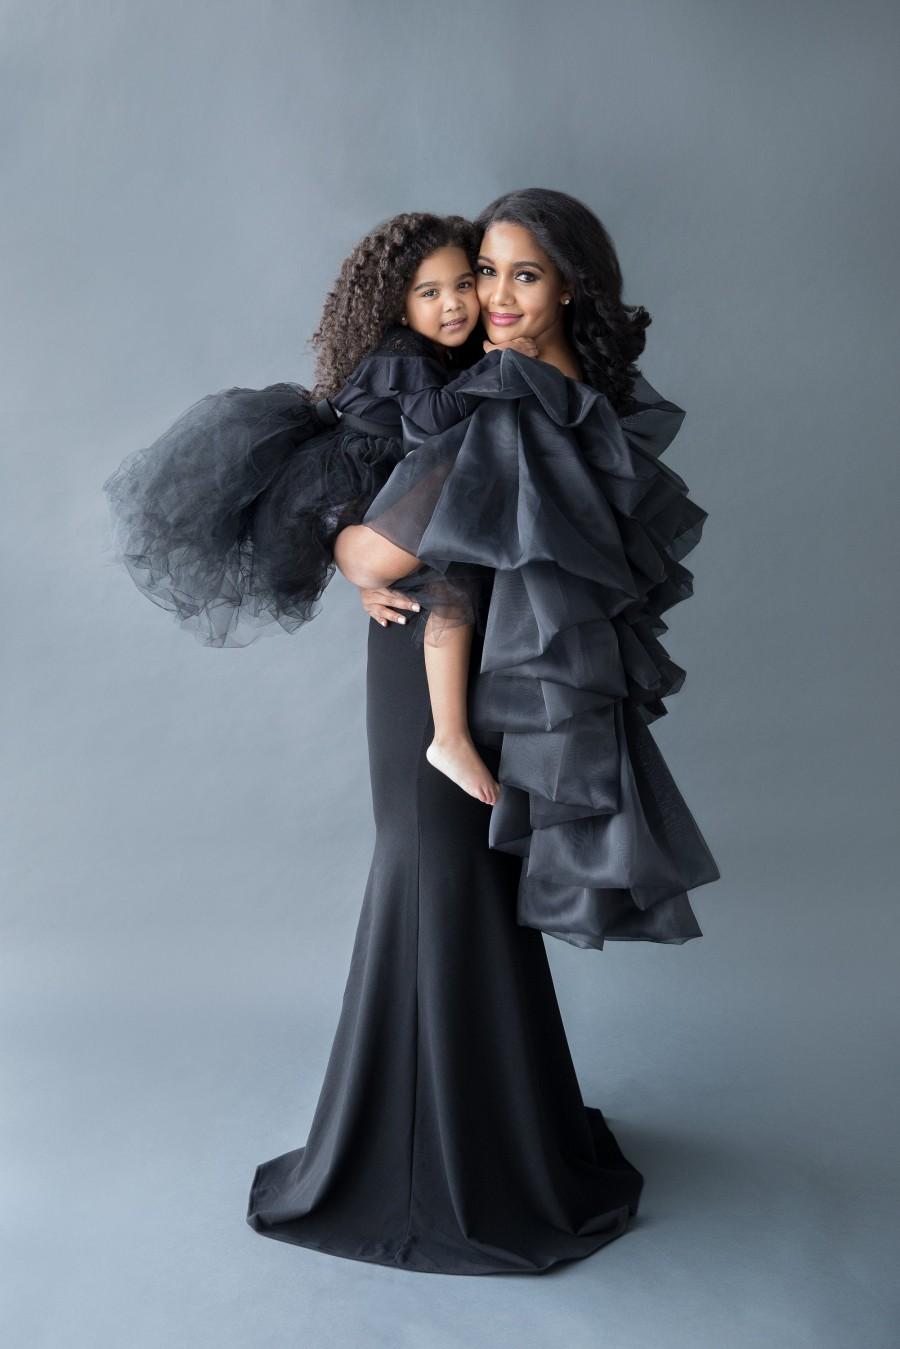 Mariage - Black Engagement Dress for Photo shoots and Photography Gown with ruffle cape dramatic dress mermaid style - The Patrician Cape Gown